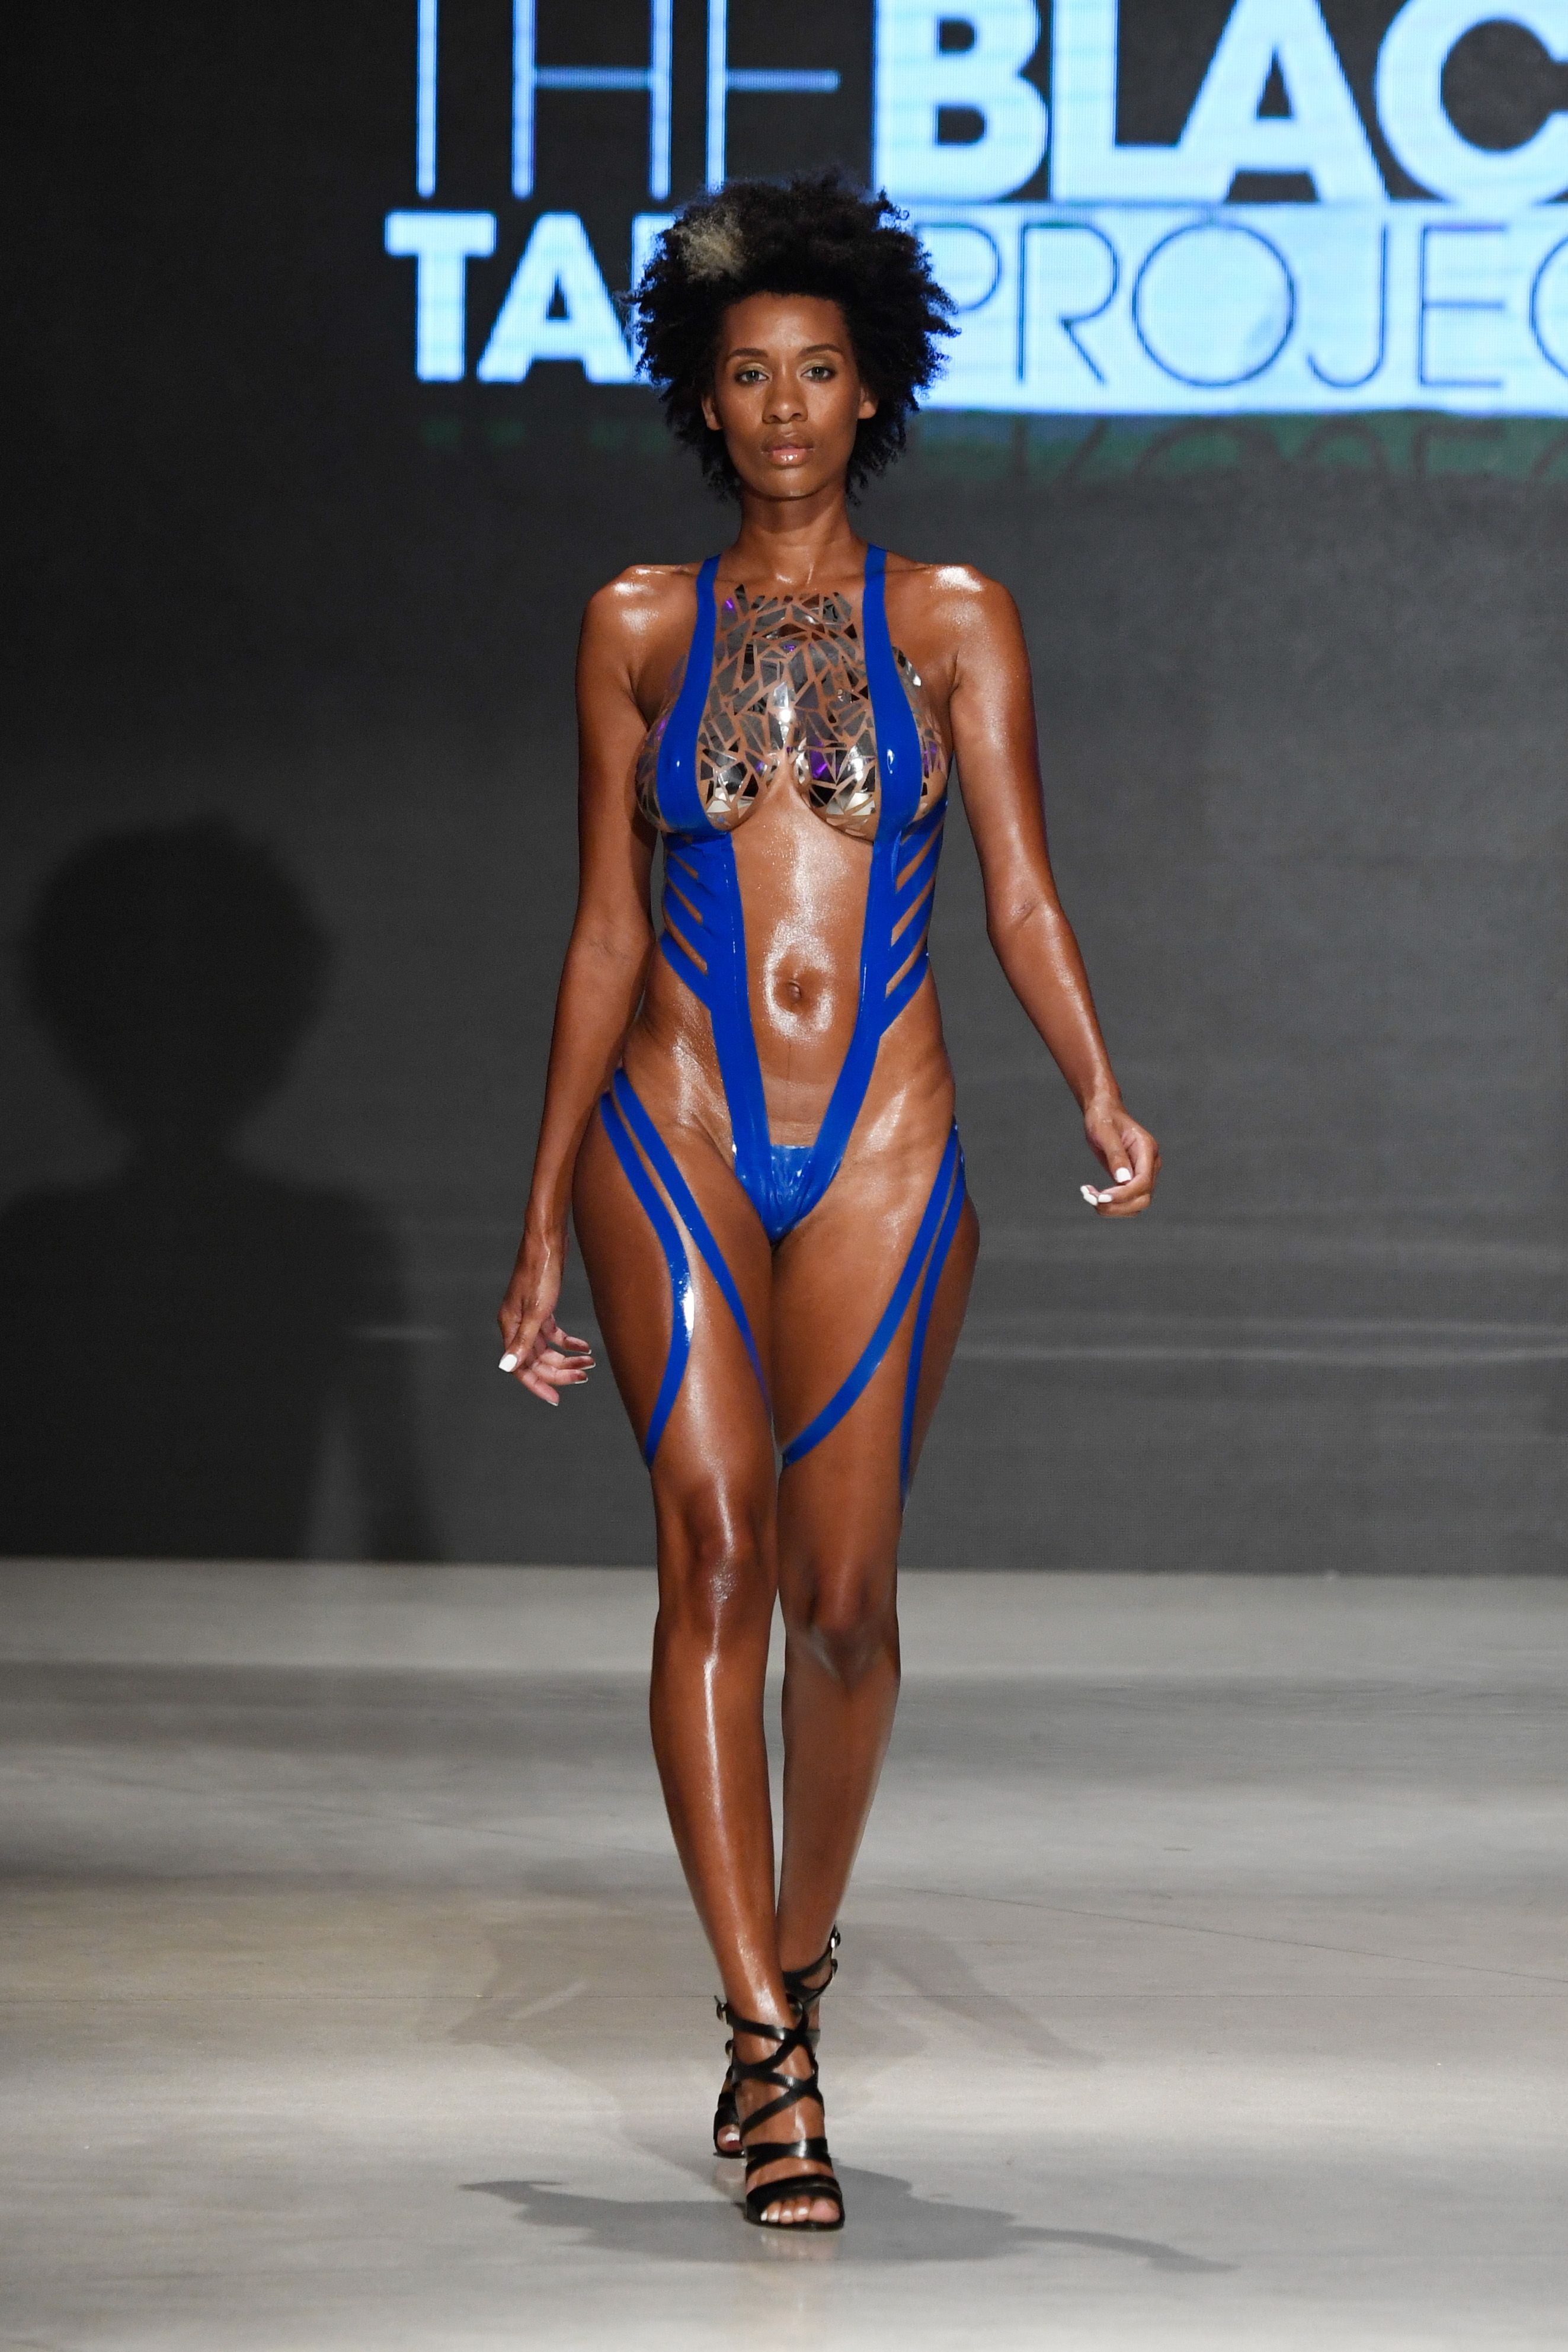 2646px x 3969px - Nearly Naked Metallic Tape Swimsuits Exist - All About the Black Tape  Project Maimi Swim Week Show